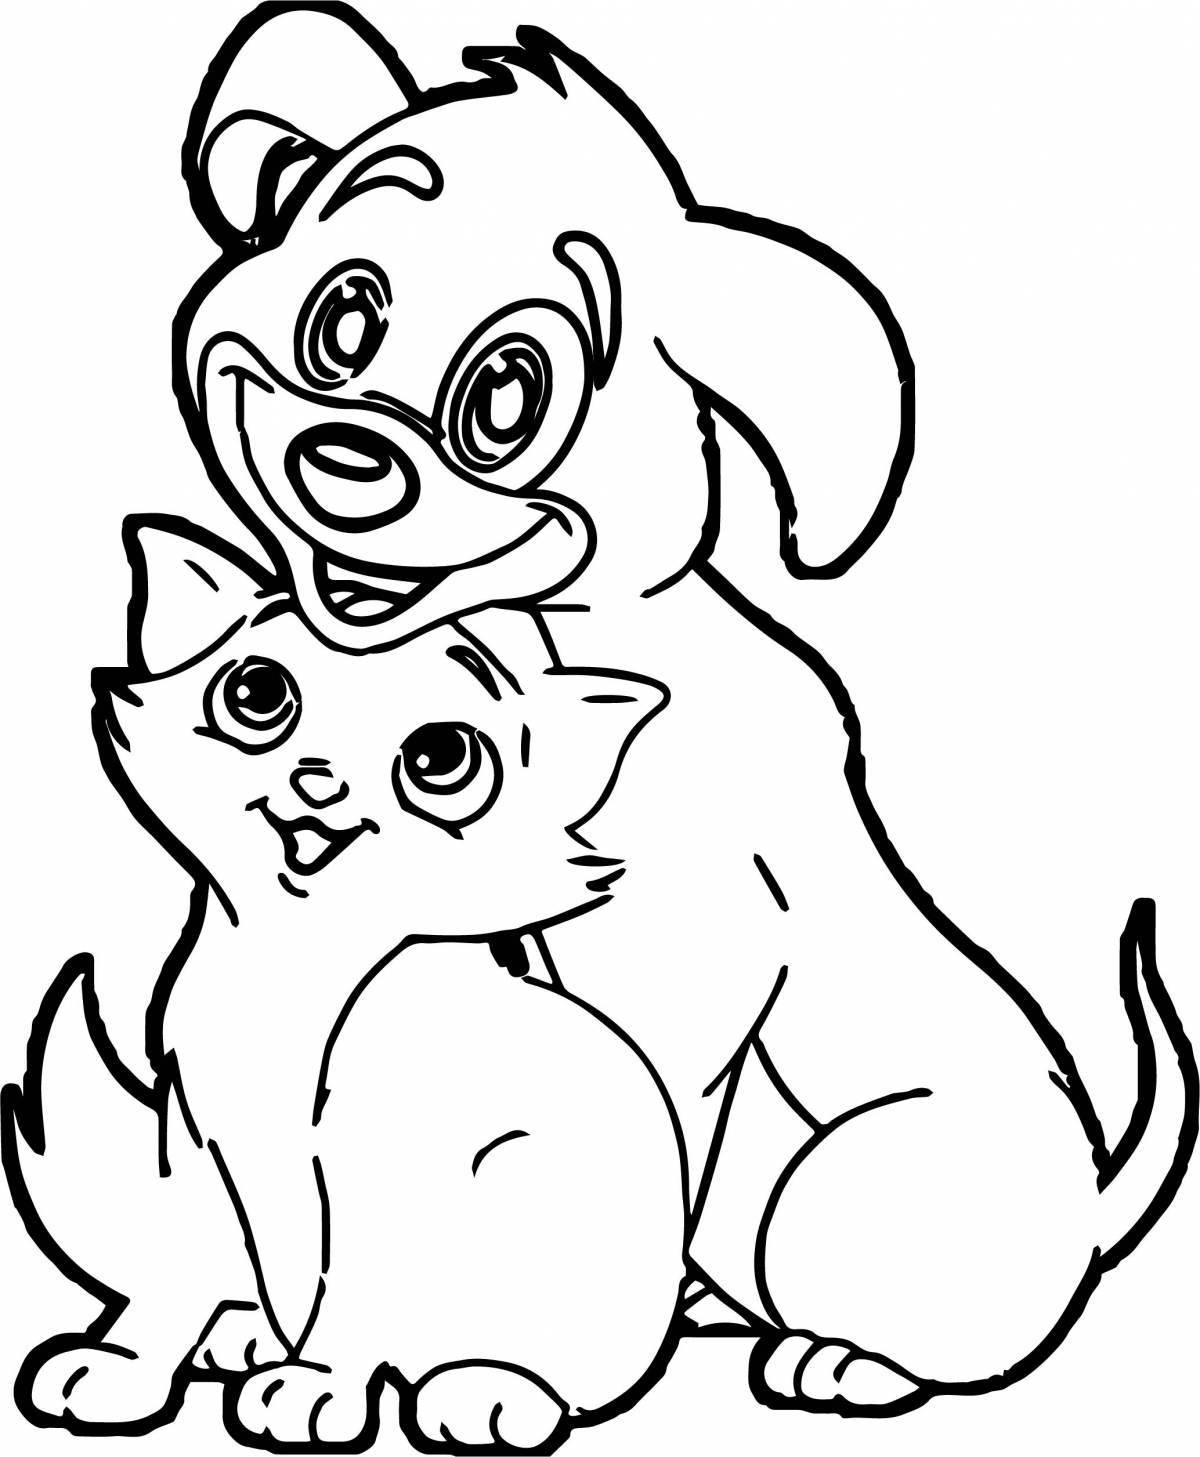 Live cat and dog together coloring book